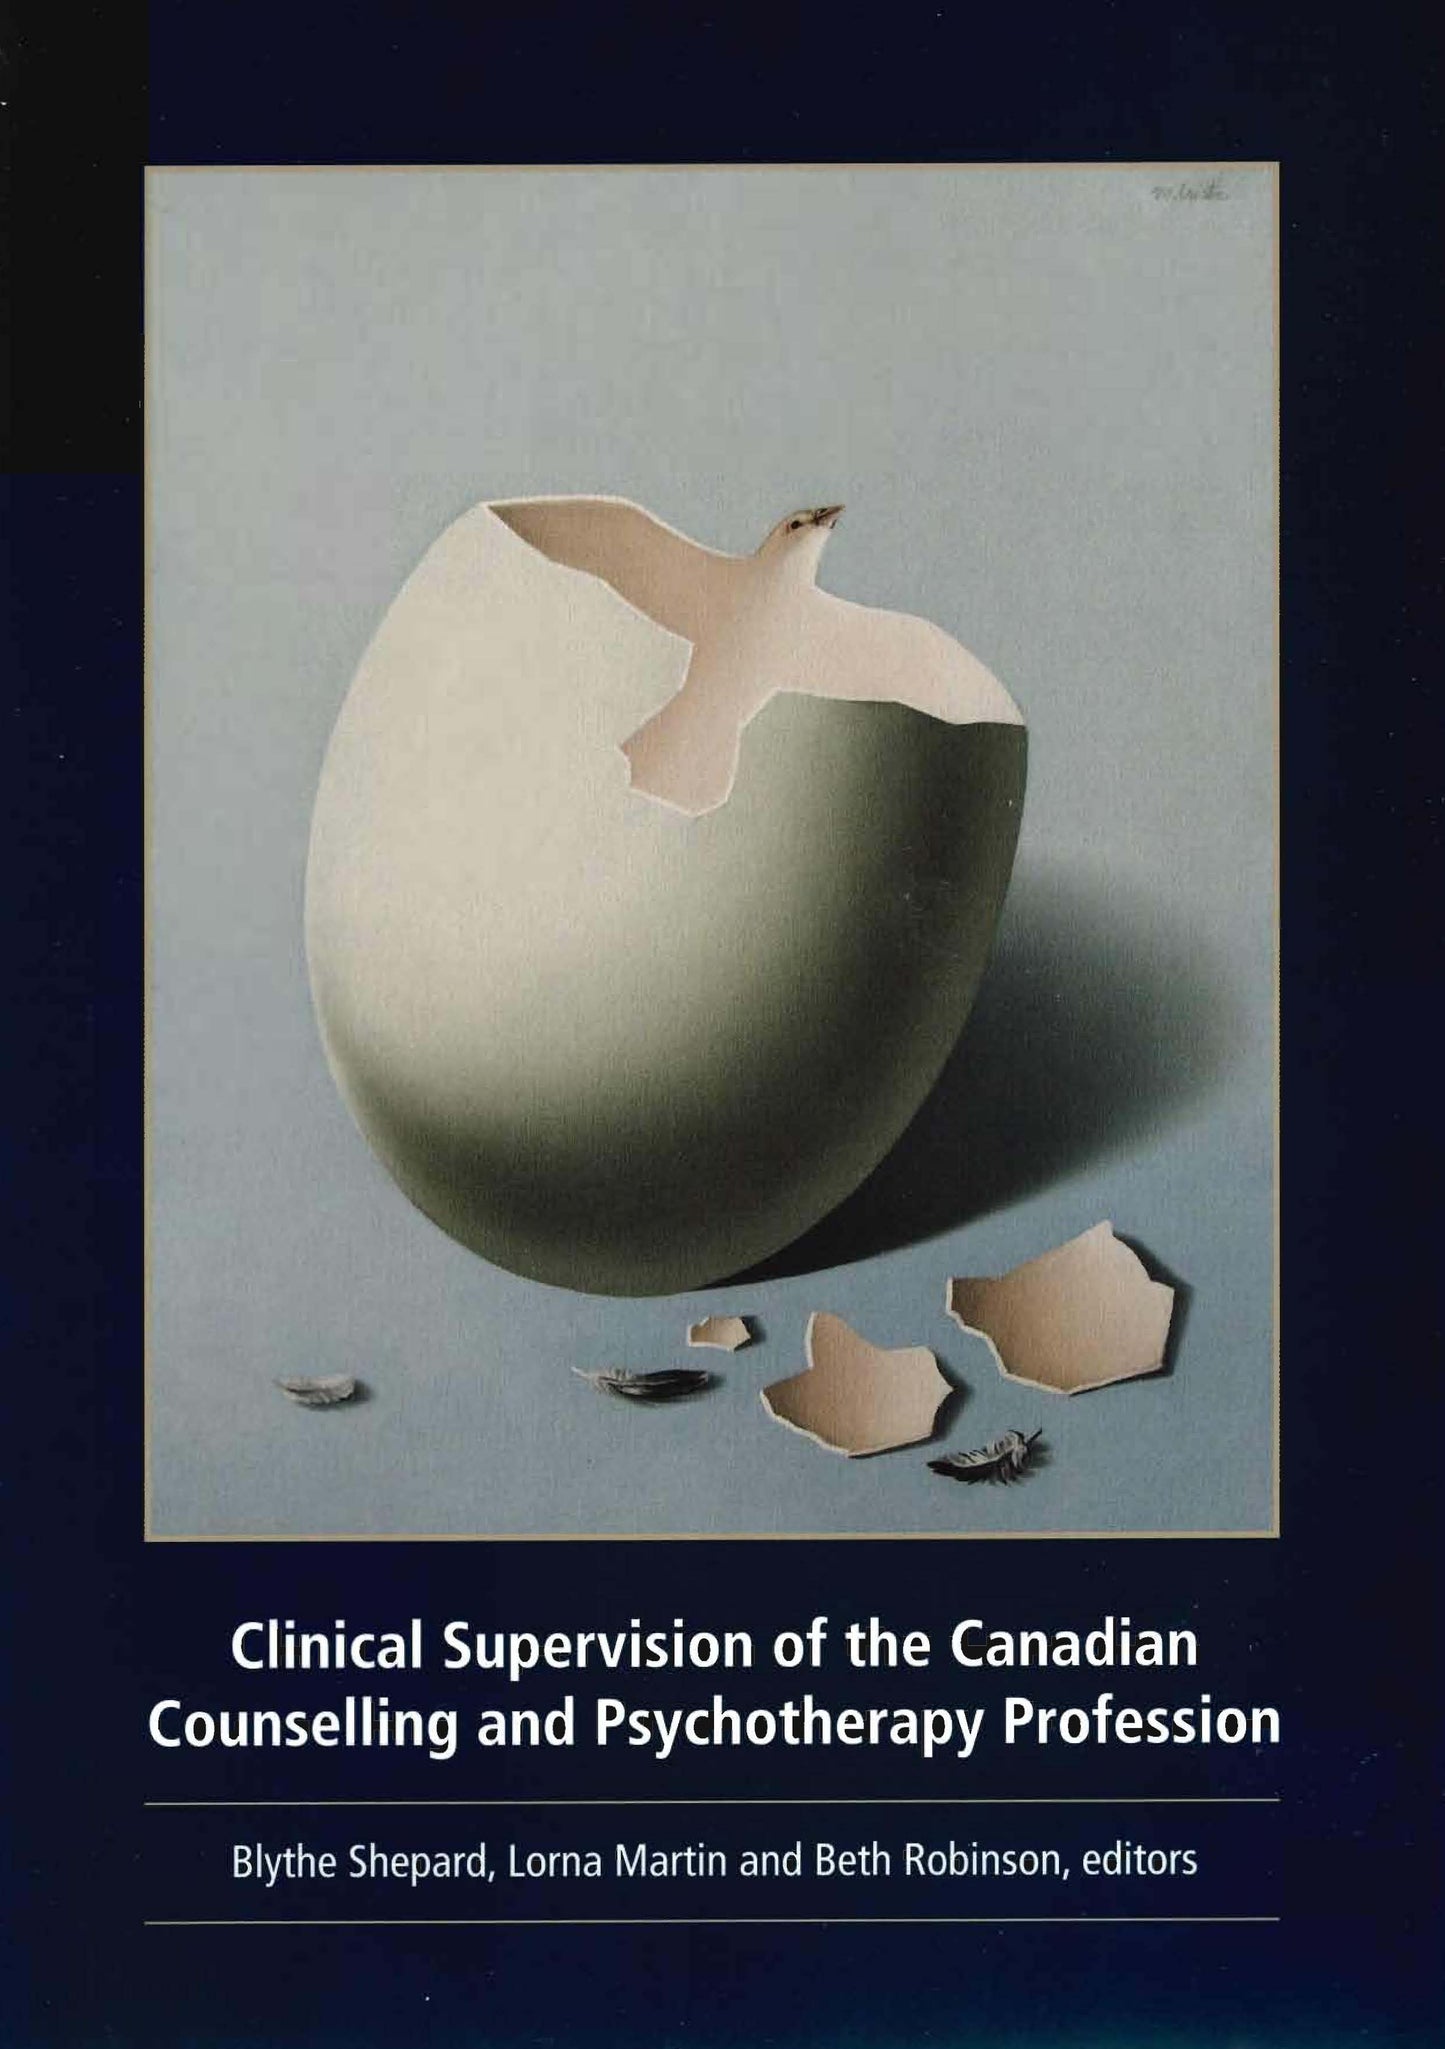 Clinical Supervision of the Canadian Counselling and Psychotherapy Profession